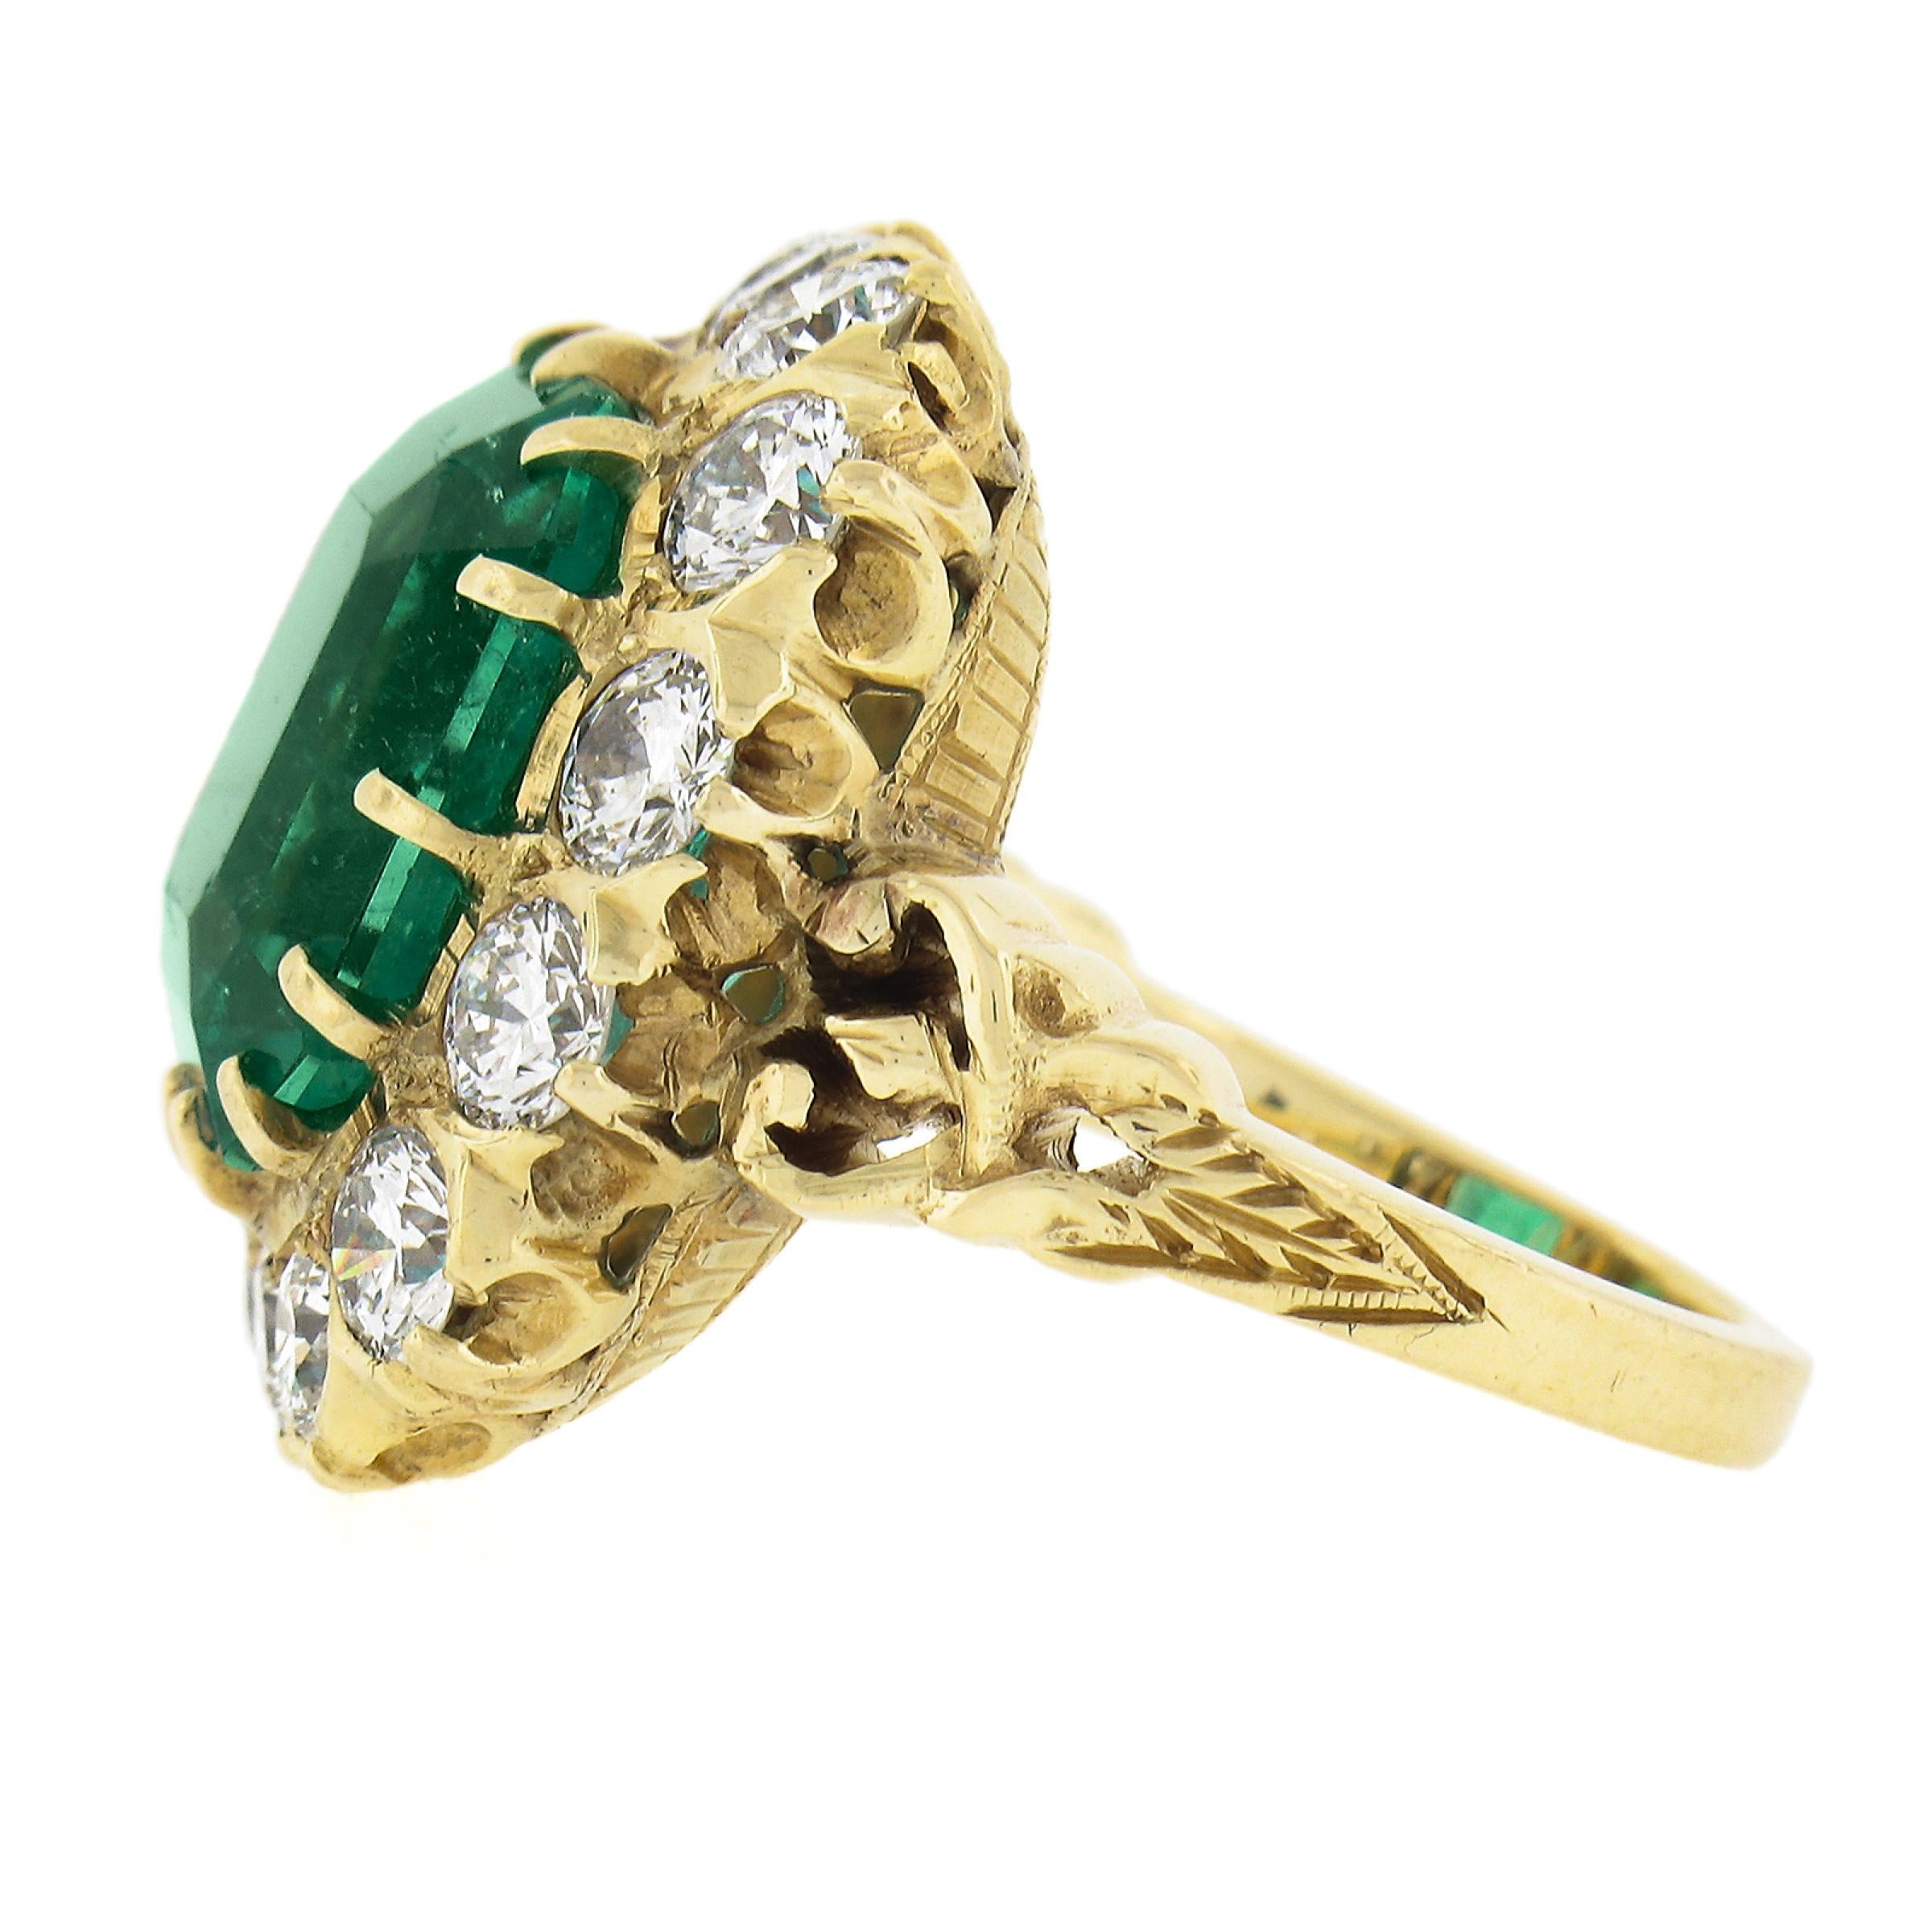 VERY FINE 18k Gold 14.3ctw AGL Colombian Emerald & Diamond Halo Cocktail Ring For Sale 1